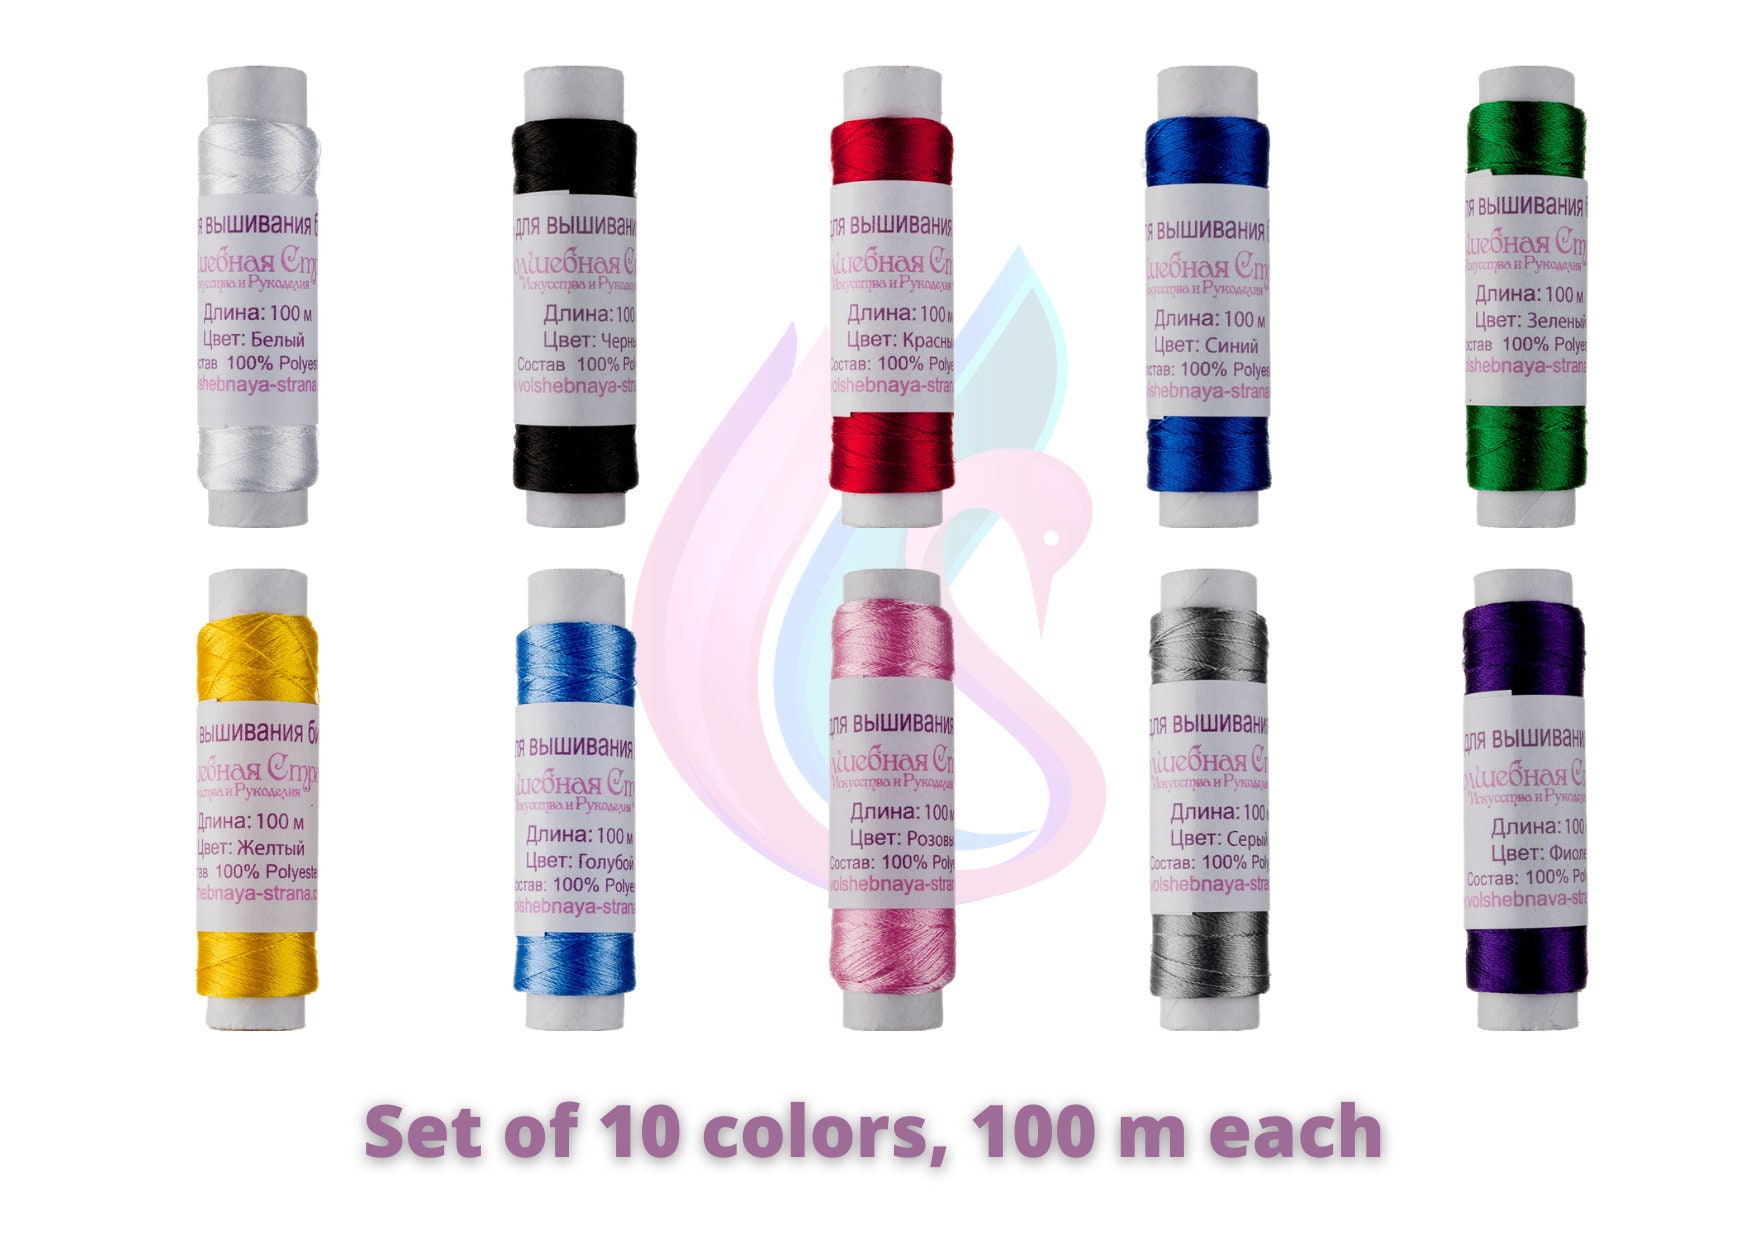 Beading Threads Thread for Beads Set of 10 Colored Threads - Etsy